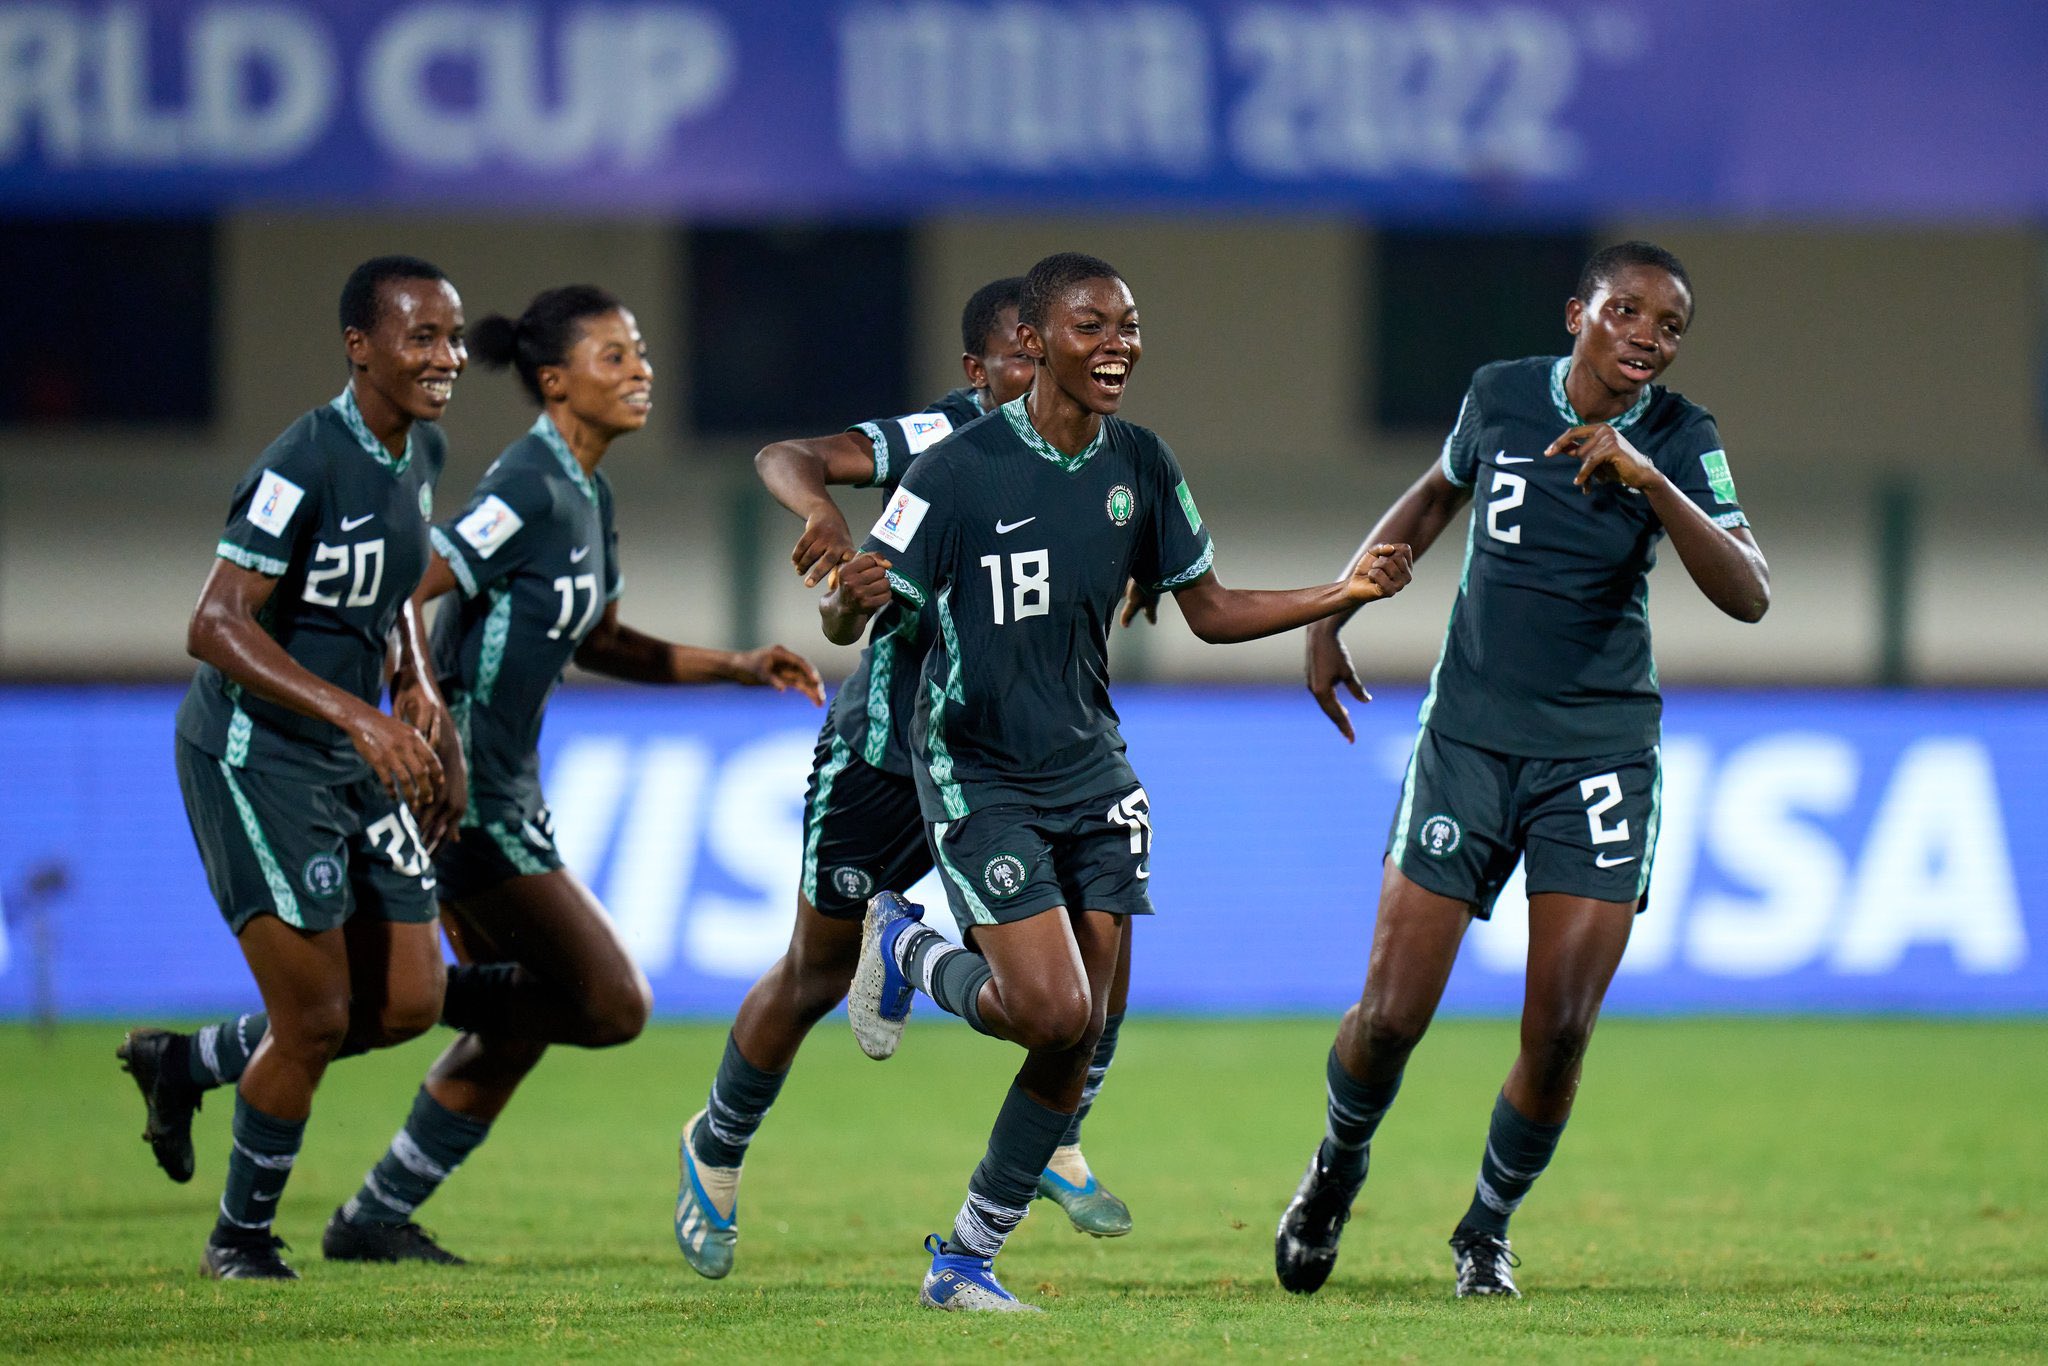 Flamingos Beat USA To Qualify For First-Ever Semi-final At U-17 World Cup